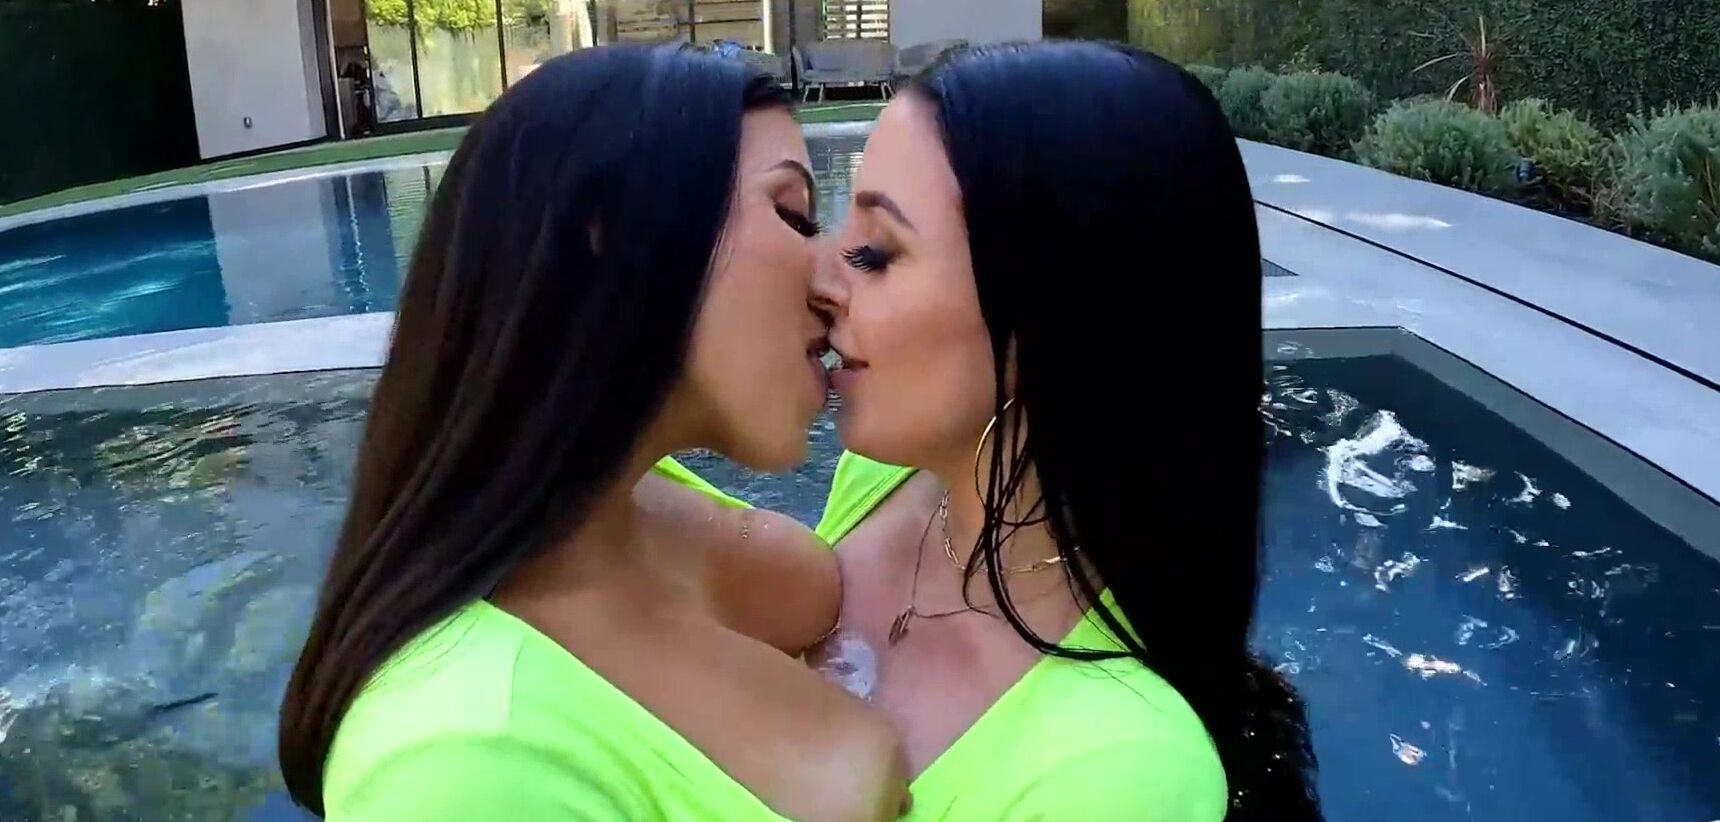 Threesome ANGELA WHITE - Threesome With Lena The Plug And Adam 22, Missionary Video - XXX Video picture